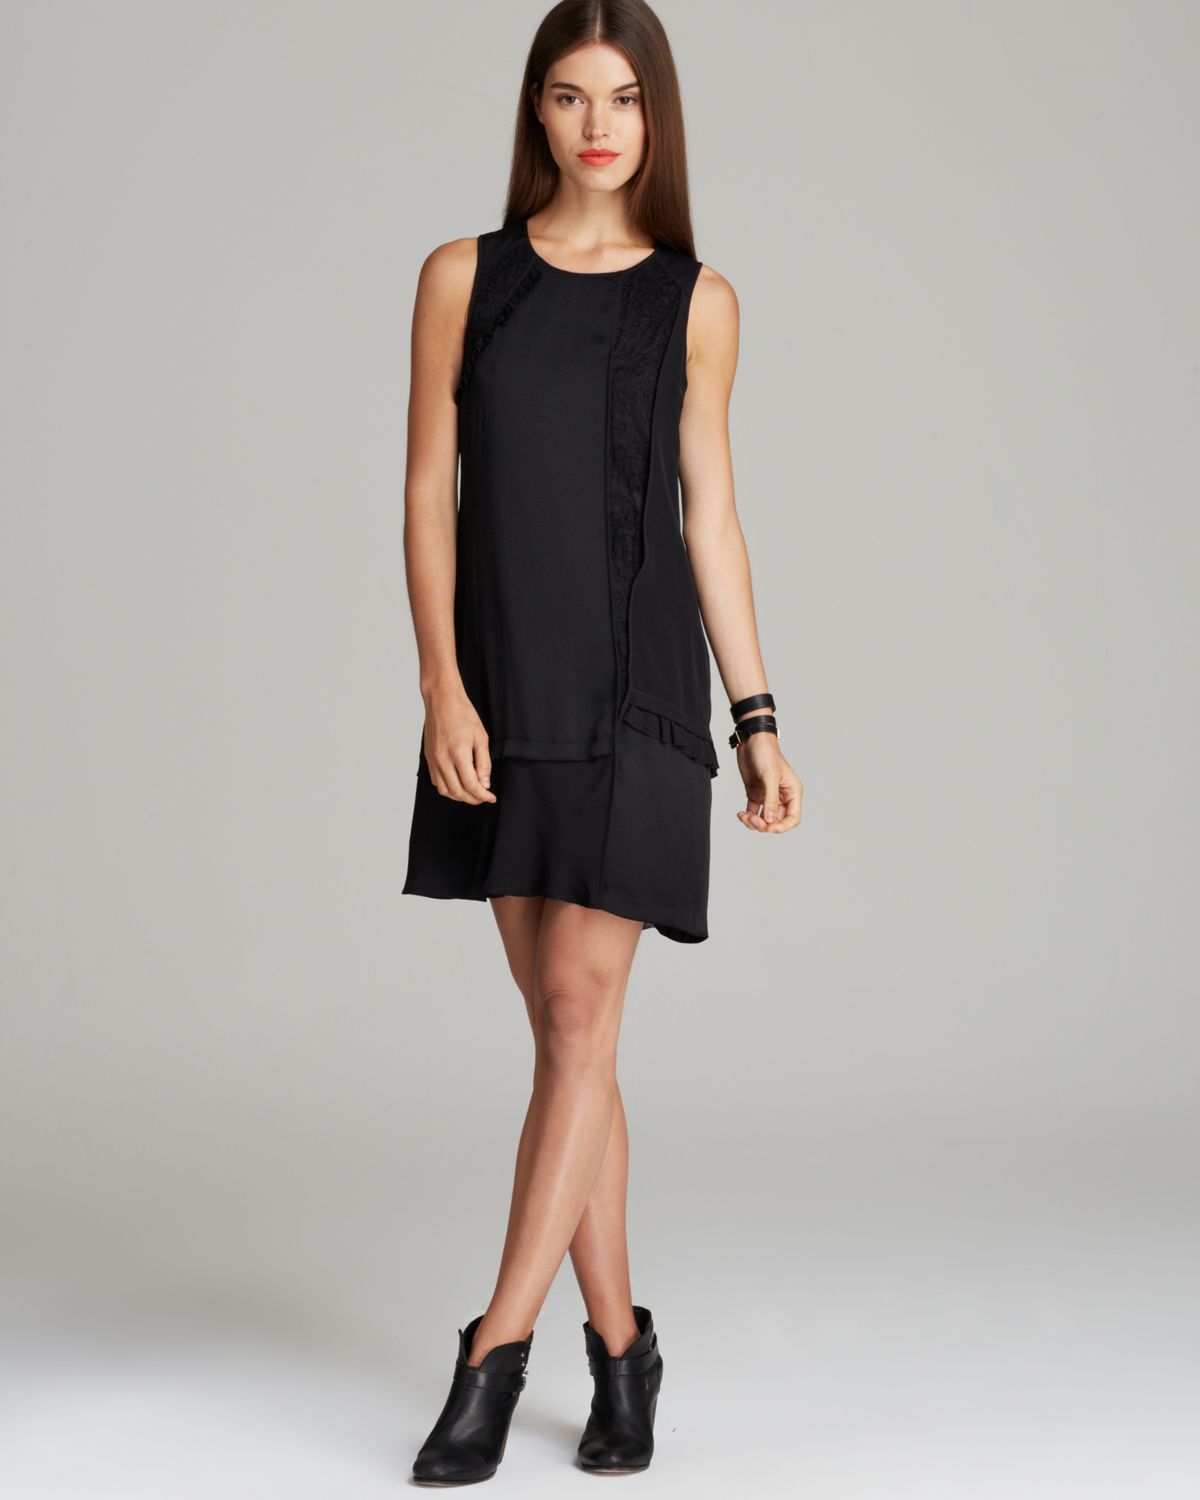 Marc by marc jacobs Dress Victoria Lace in Black | Lyst